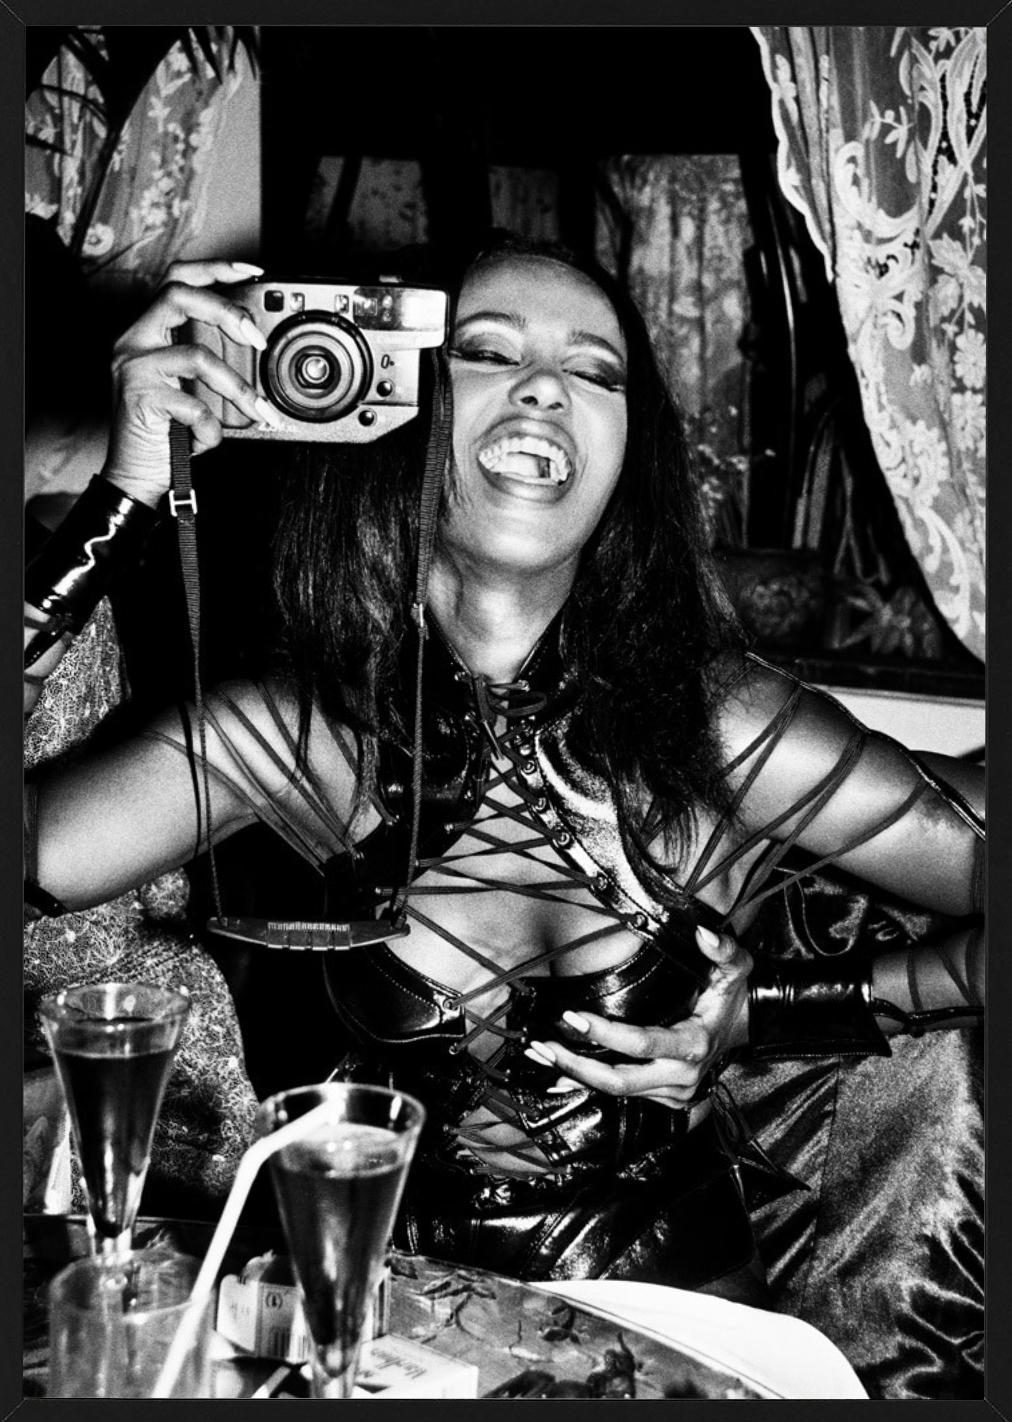 Iman, Paris - black-and-white portrait of model Iman in corsage with camera  - Contemporary Photograph by Roxanne Lowit